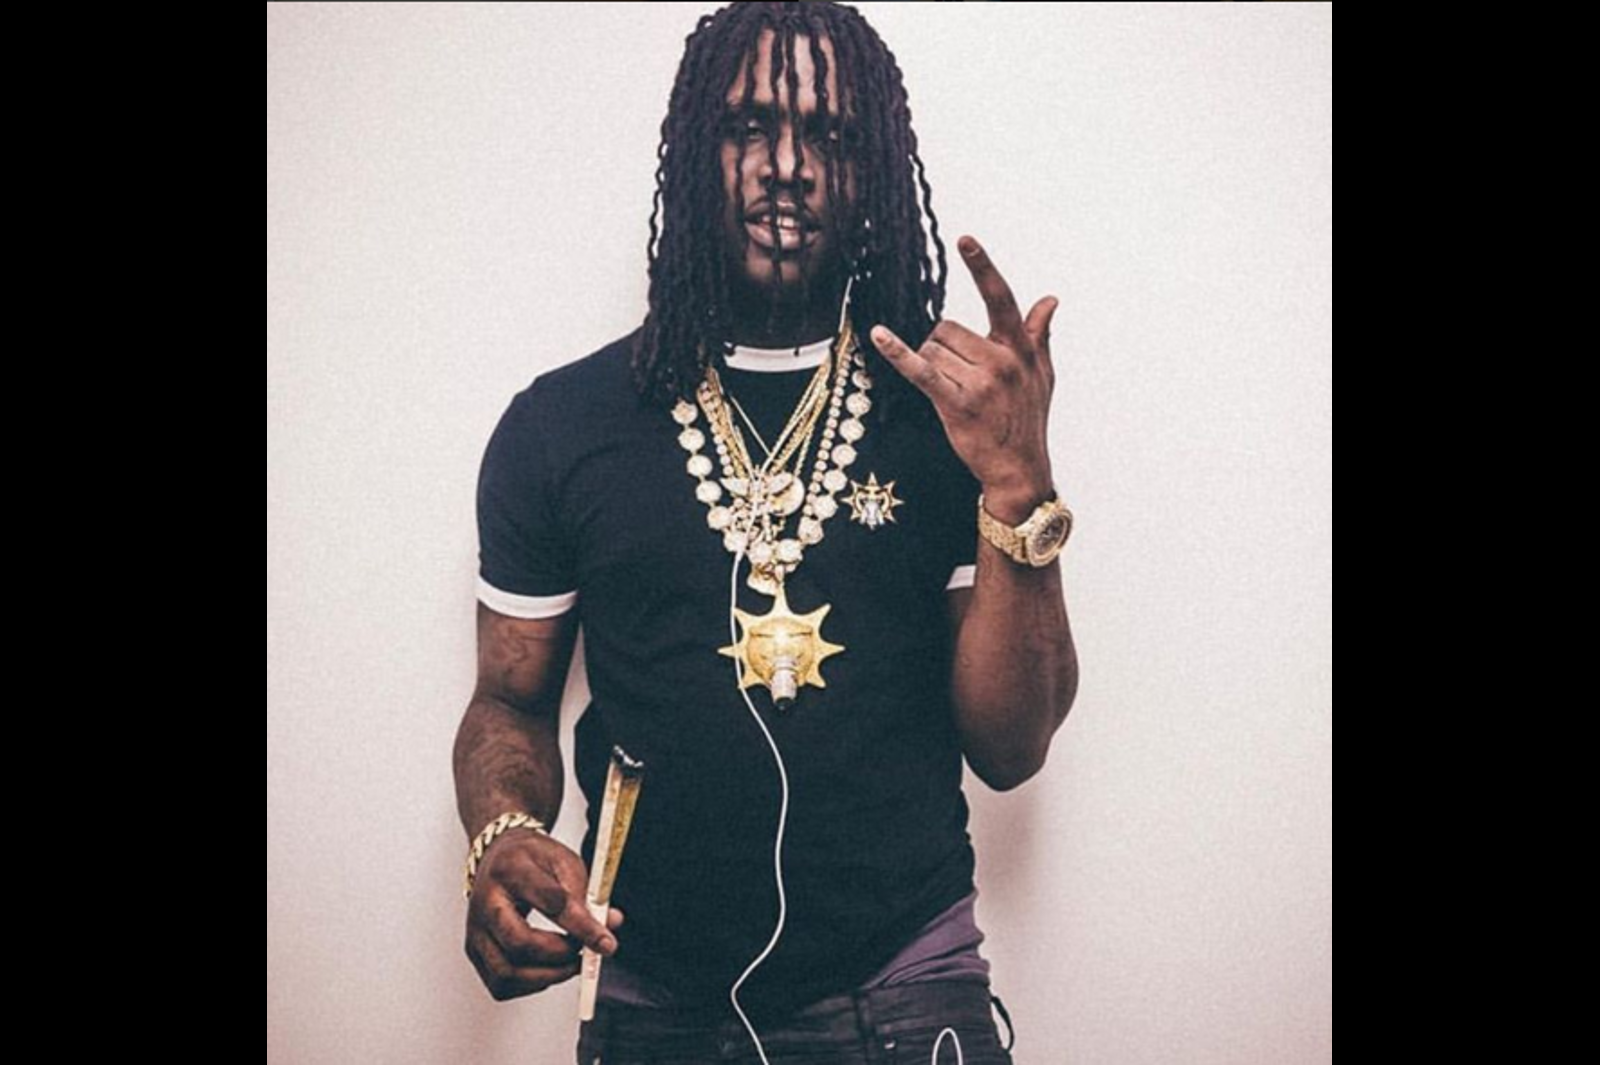 Doxygen Media – Chief Keef Arrested For DUI After A Traffic Stop